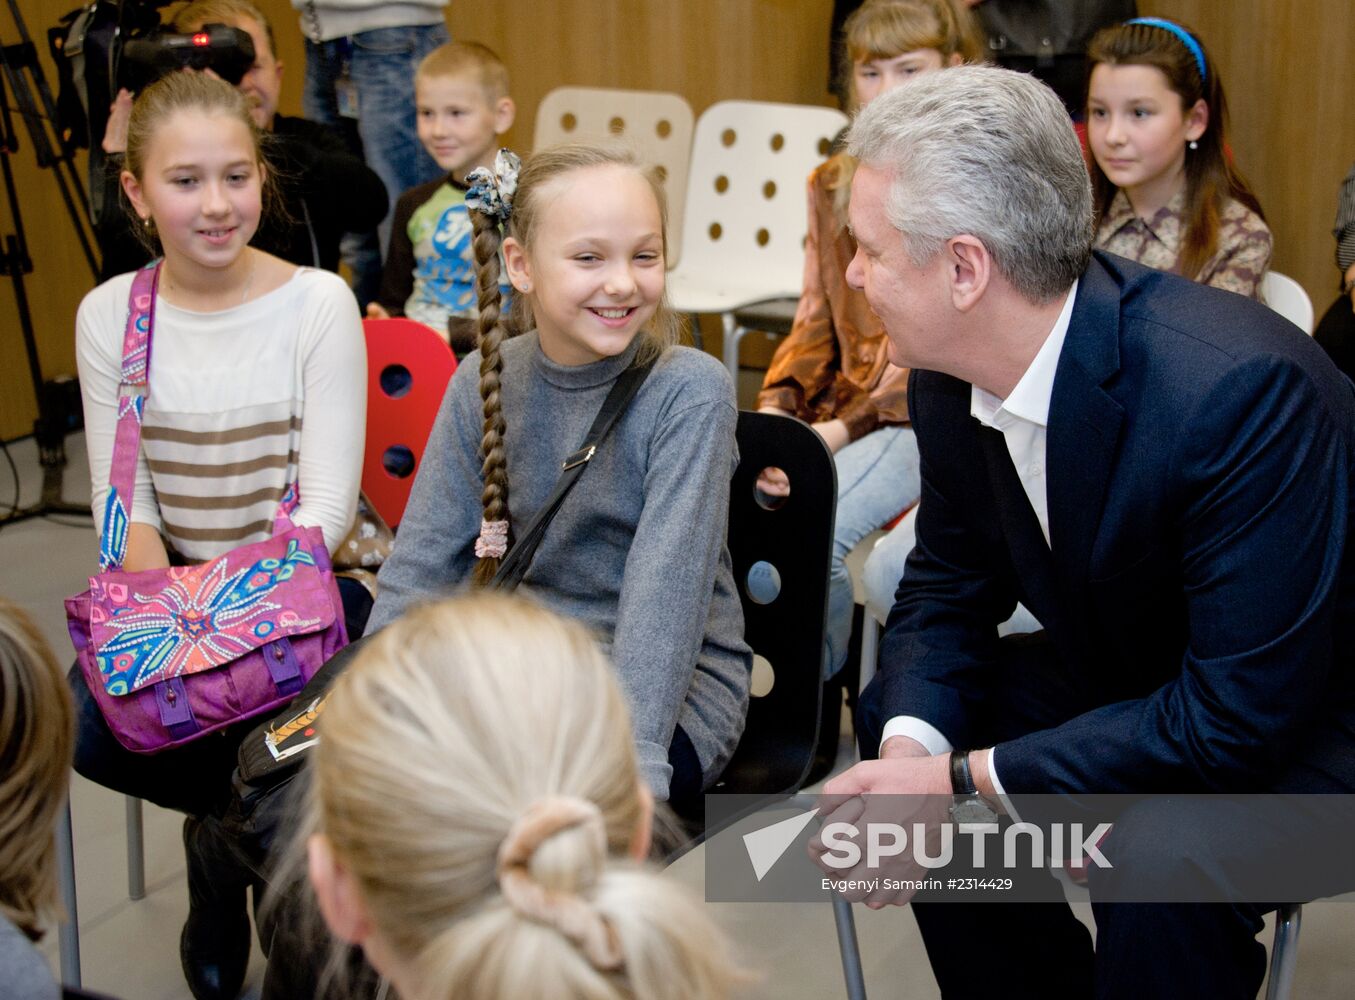 Sergei Sobyanin visits Prospekt library and media center in Moscow